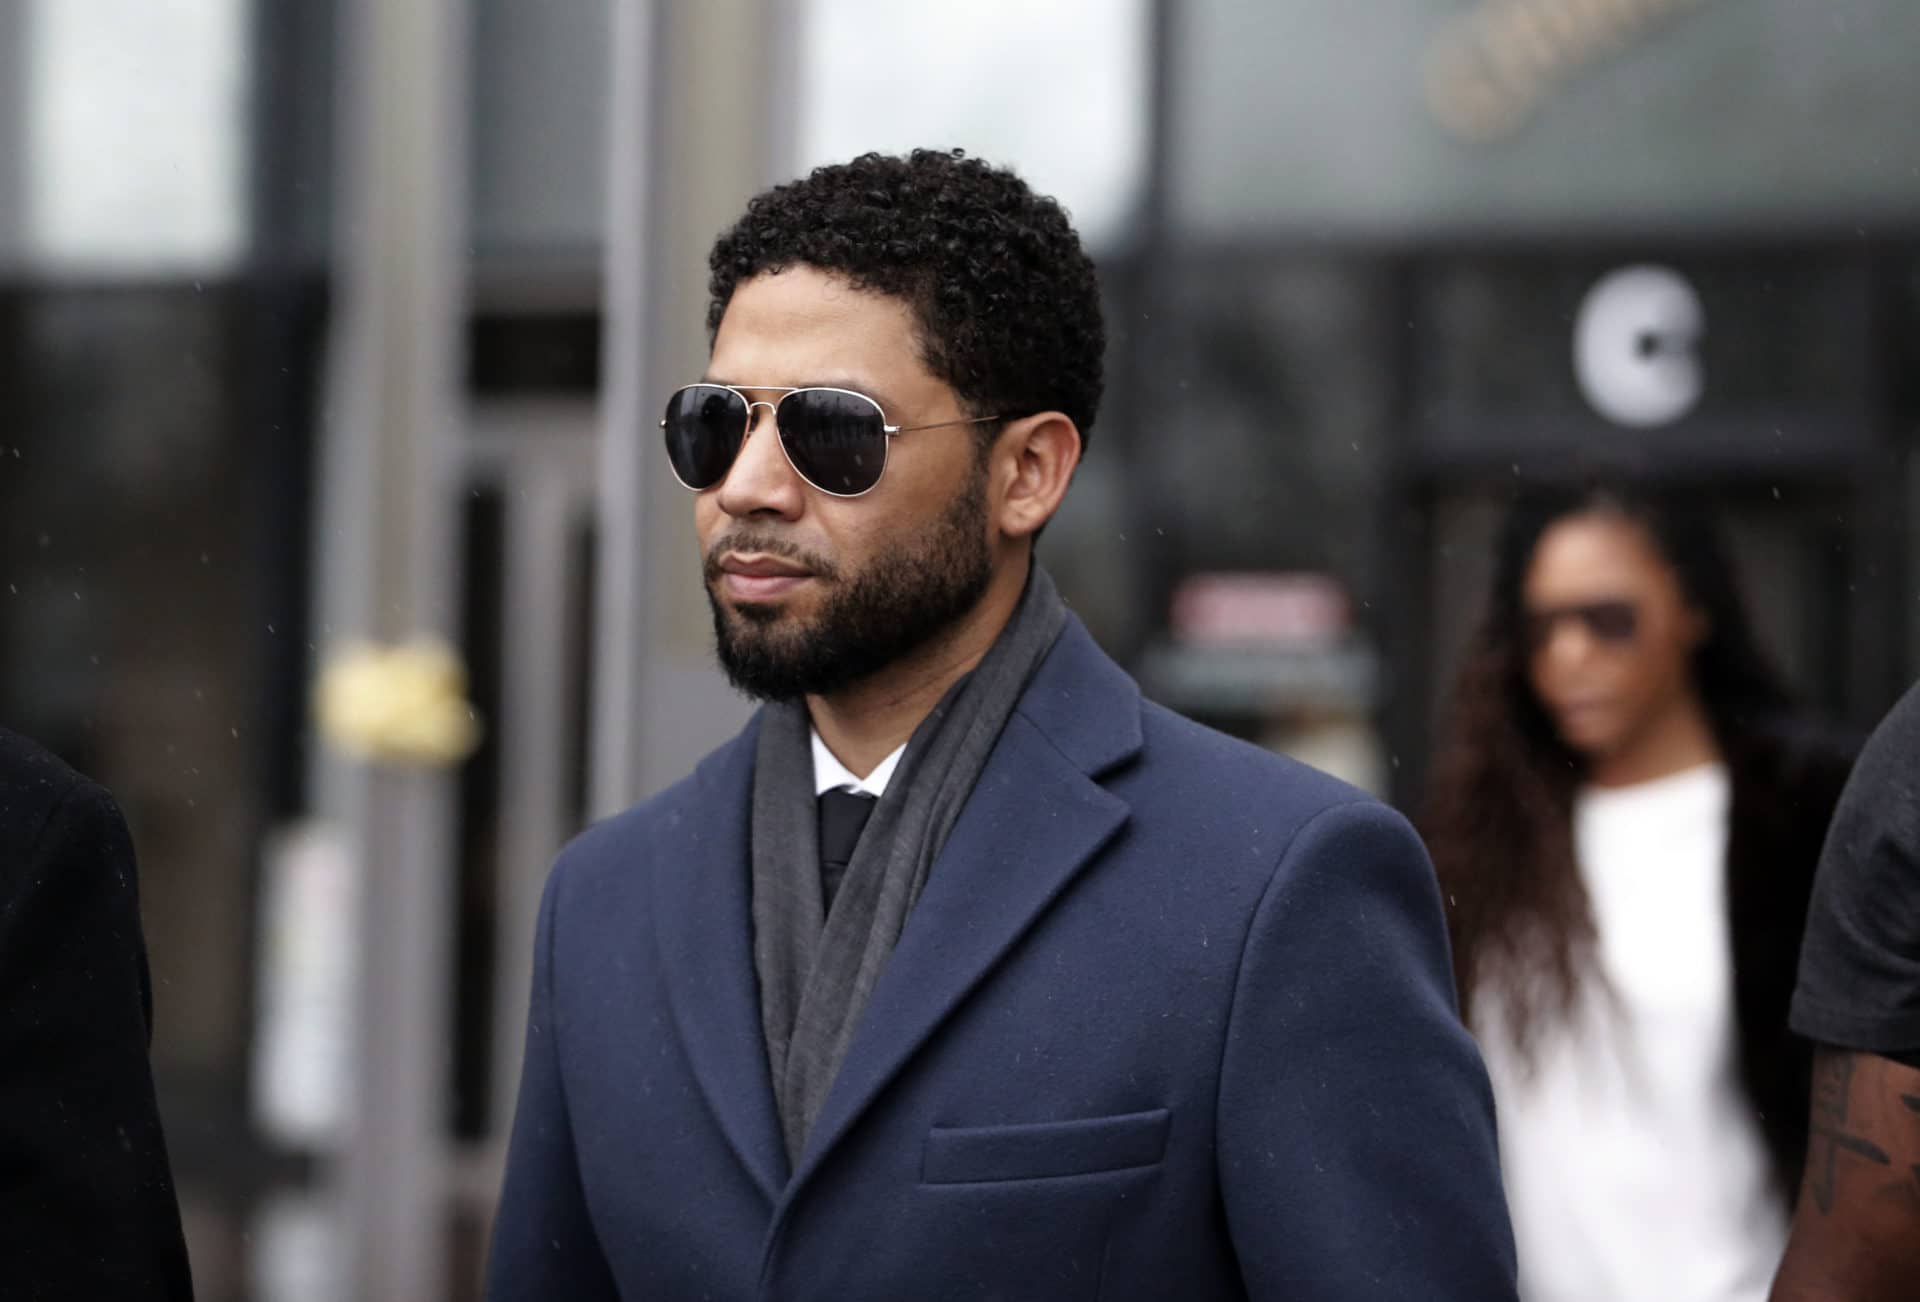 Jussie Smollett Charged Again For Hate Crime Hoax